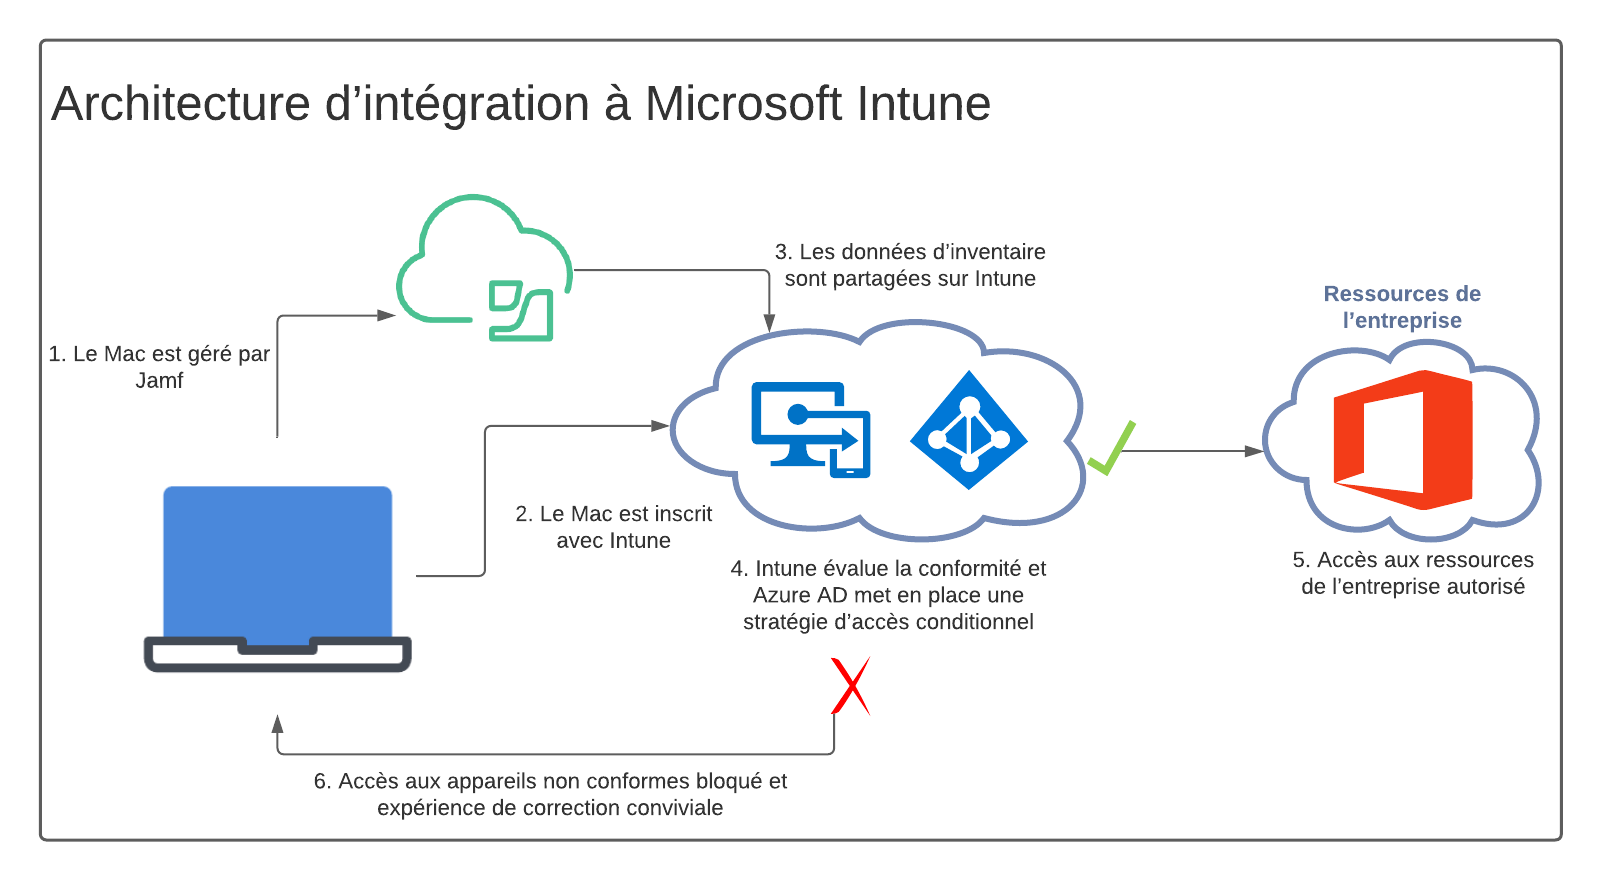 images/download/attachments/85400259/FR_Microsoft_Intune_Integration_Architecture.png